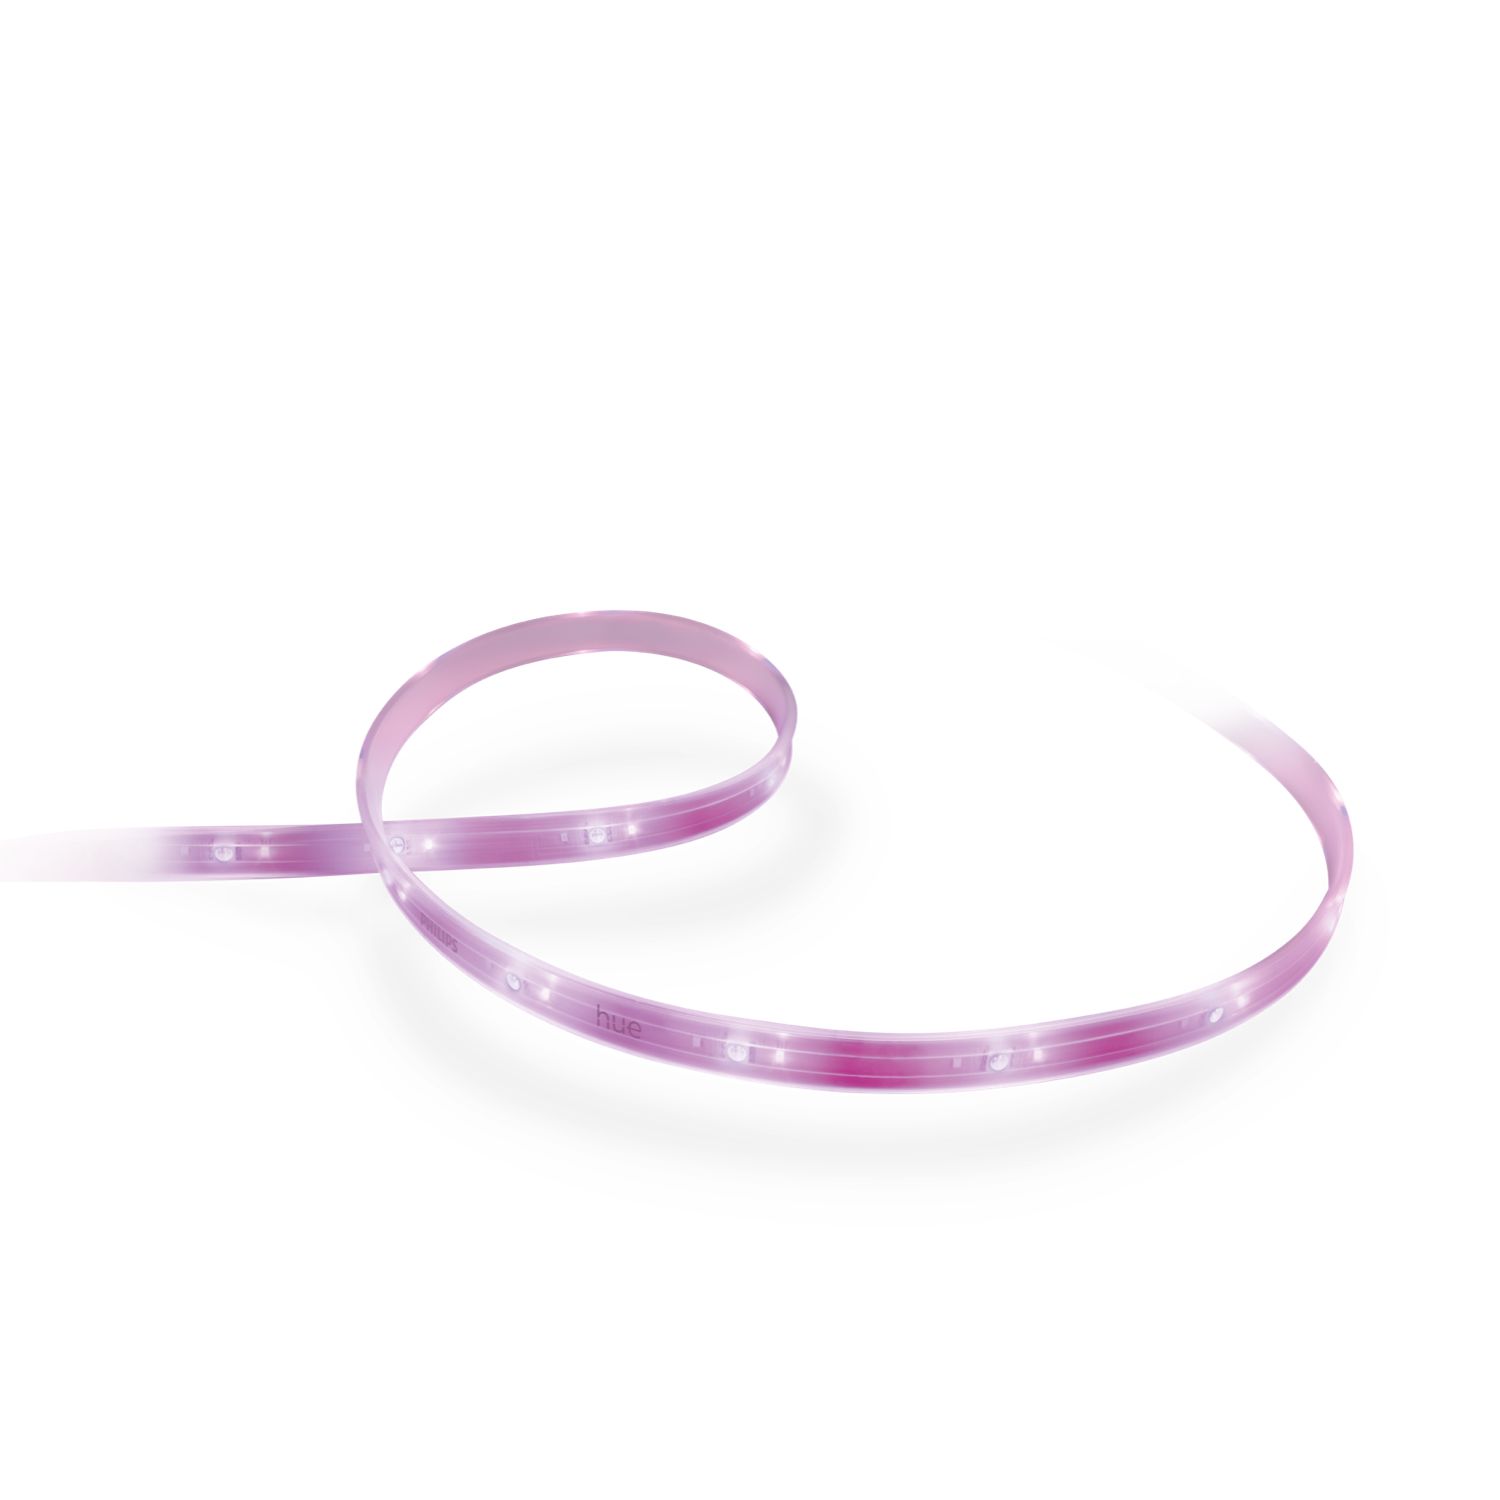 Hue White and color ambiance Lightstrip Plus, 2 meter